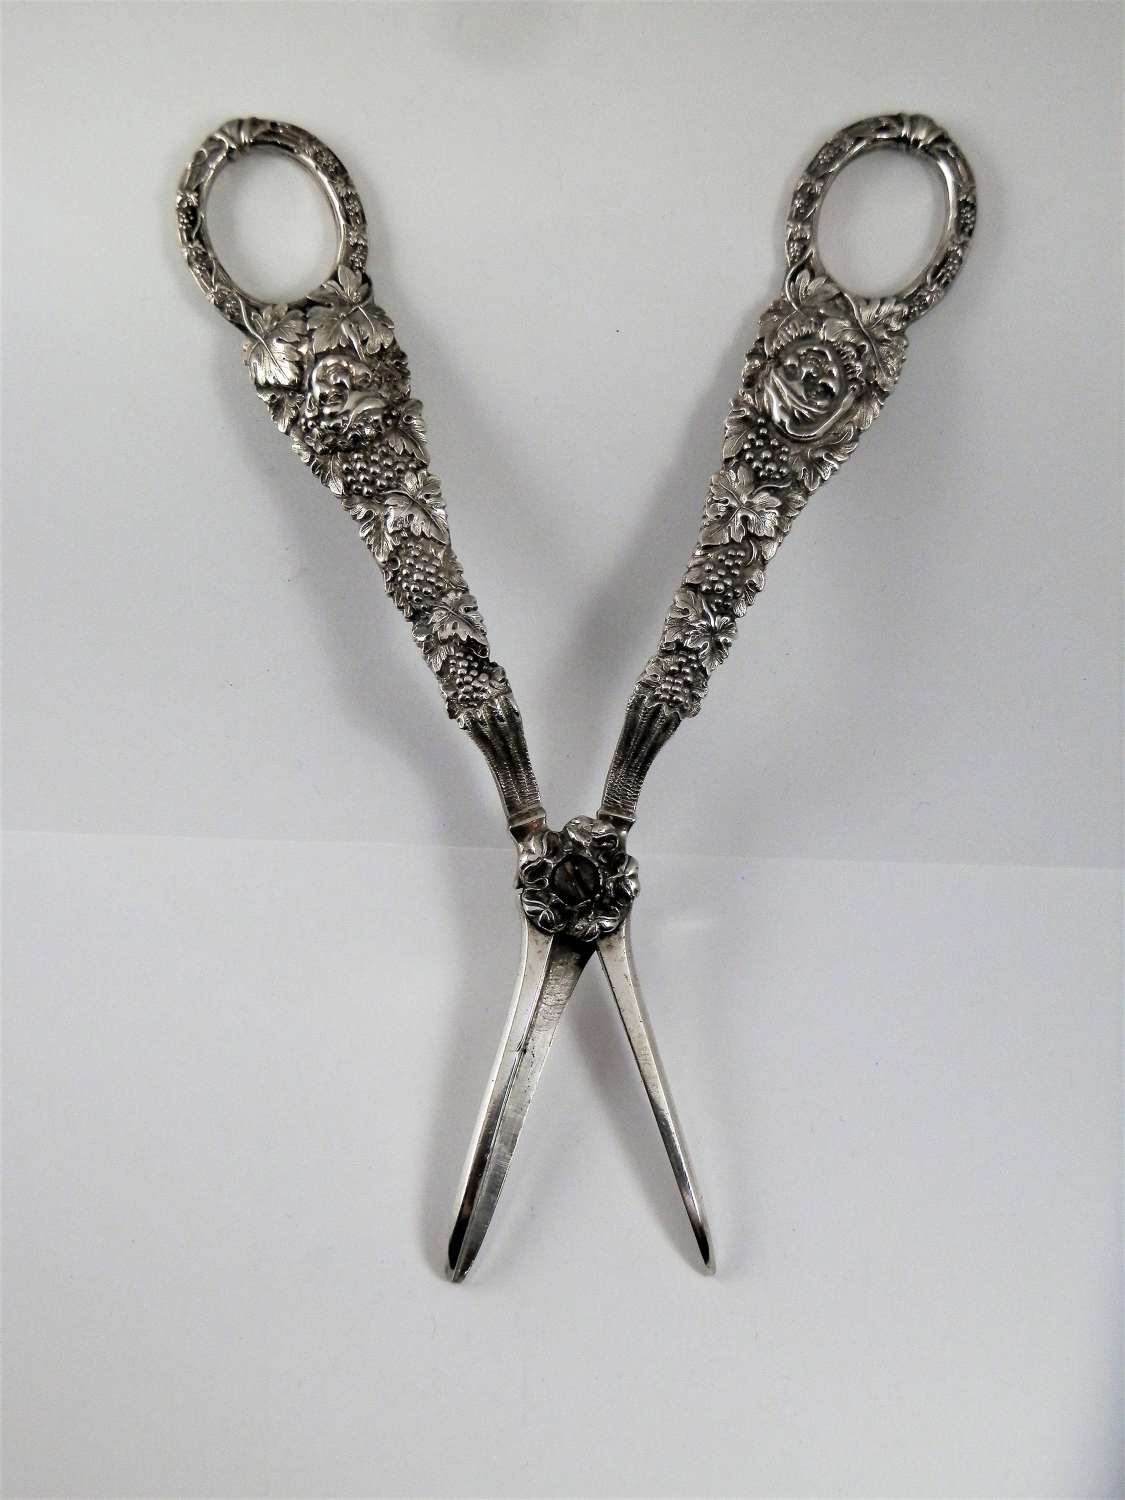 Pair of early Victorian silver grape scissors, London 1839